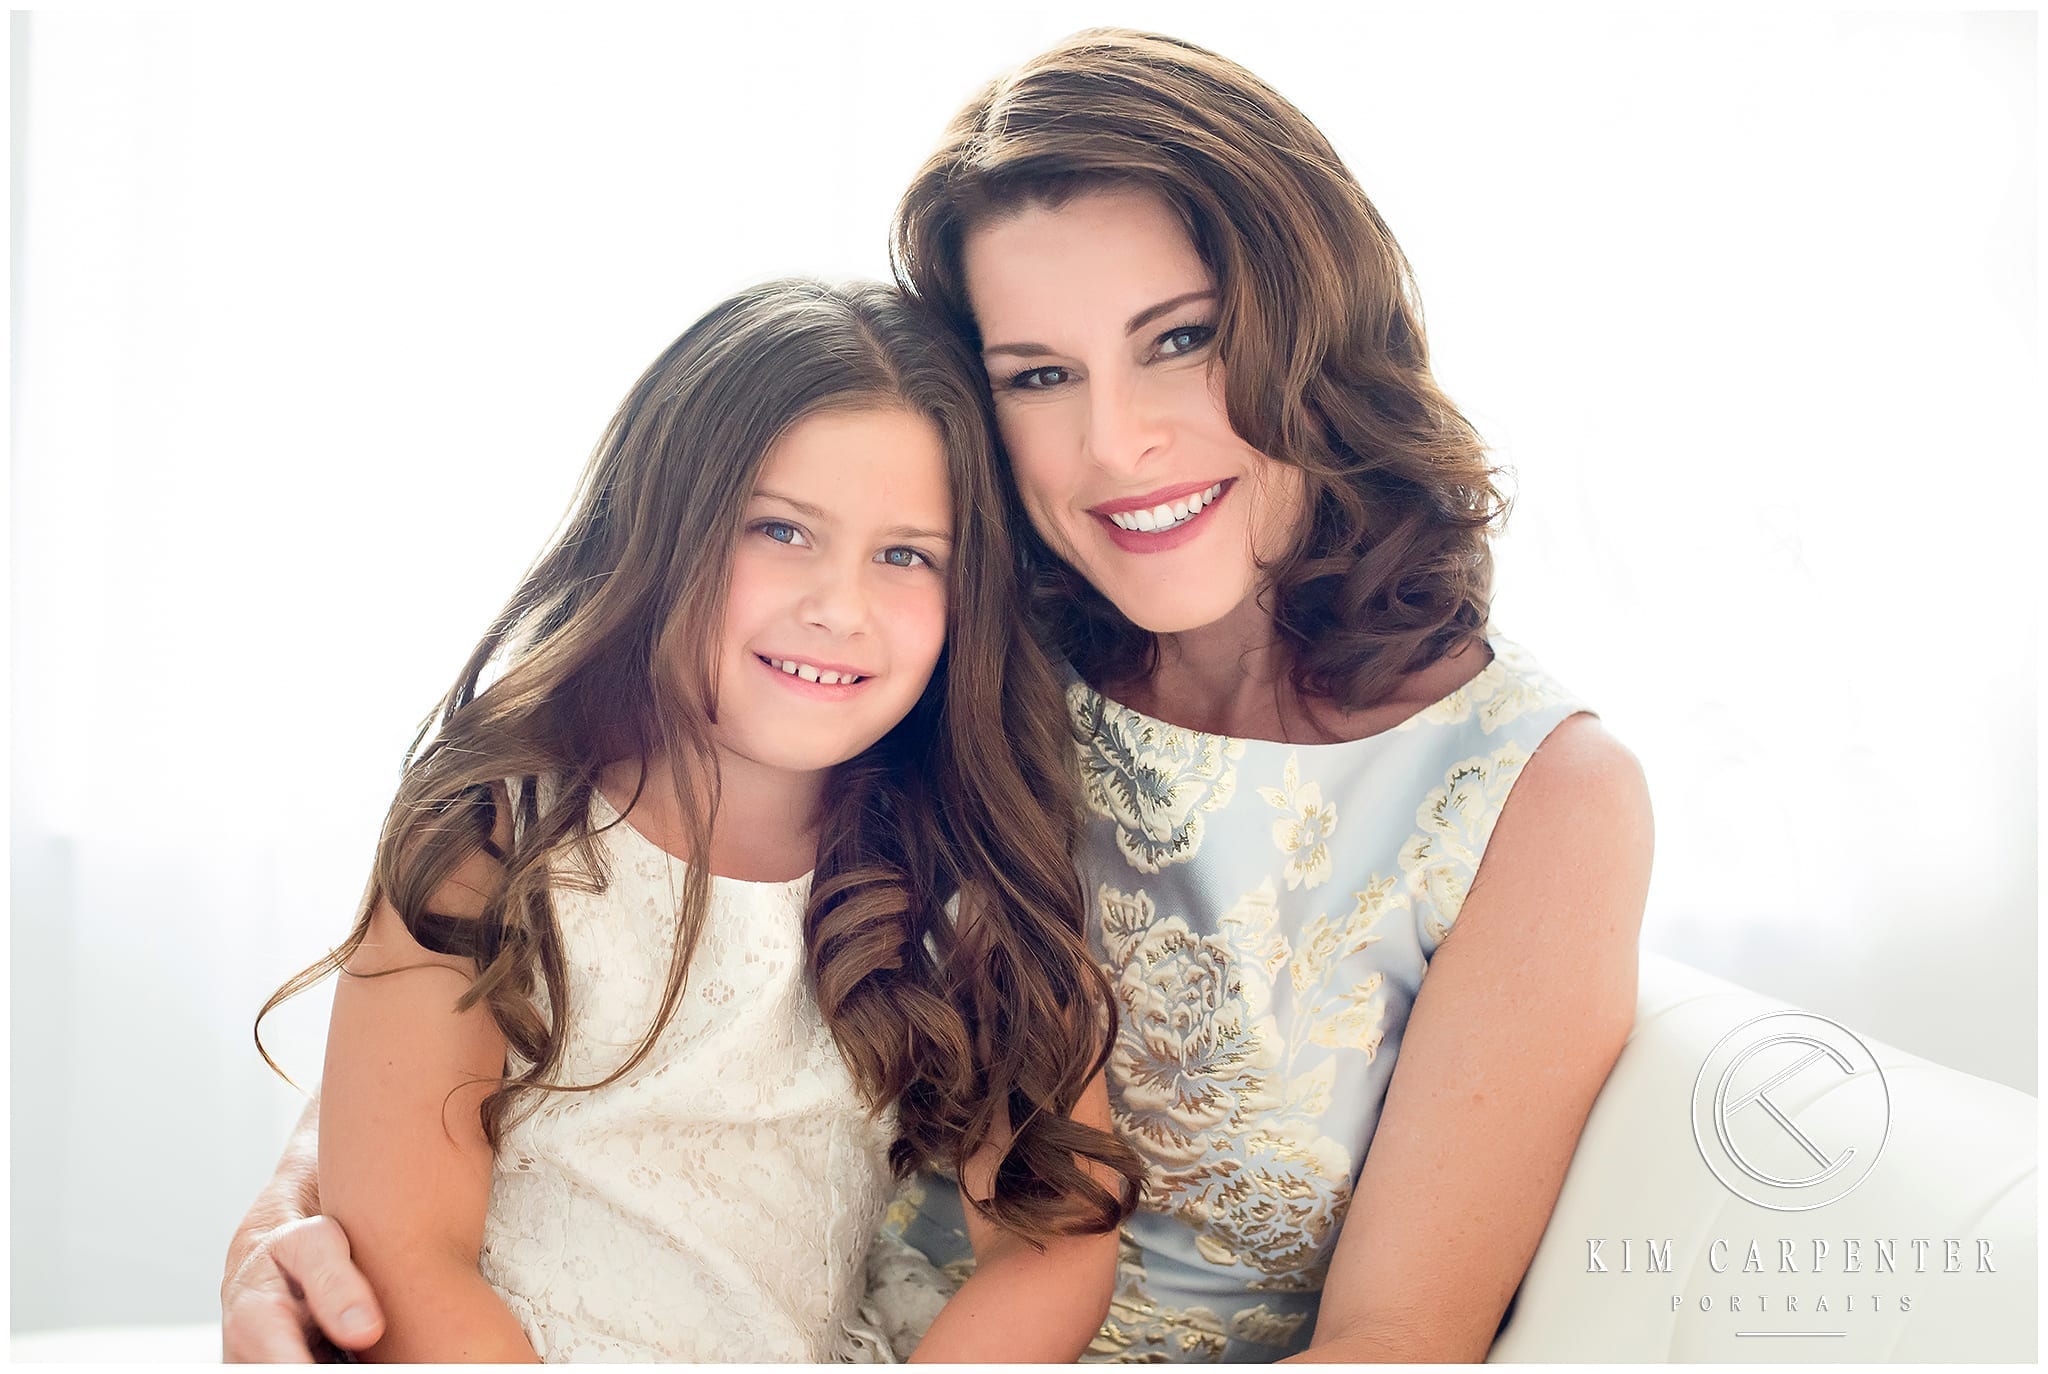 Lakeland Photographer - Beautiful Mother and daughter portrait sitting on a couch in beautiful dresses